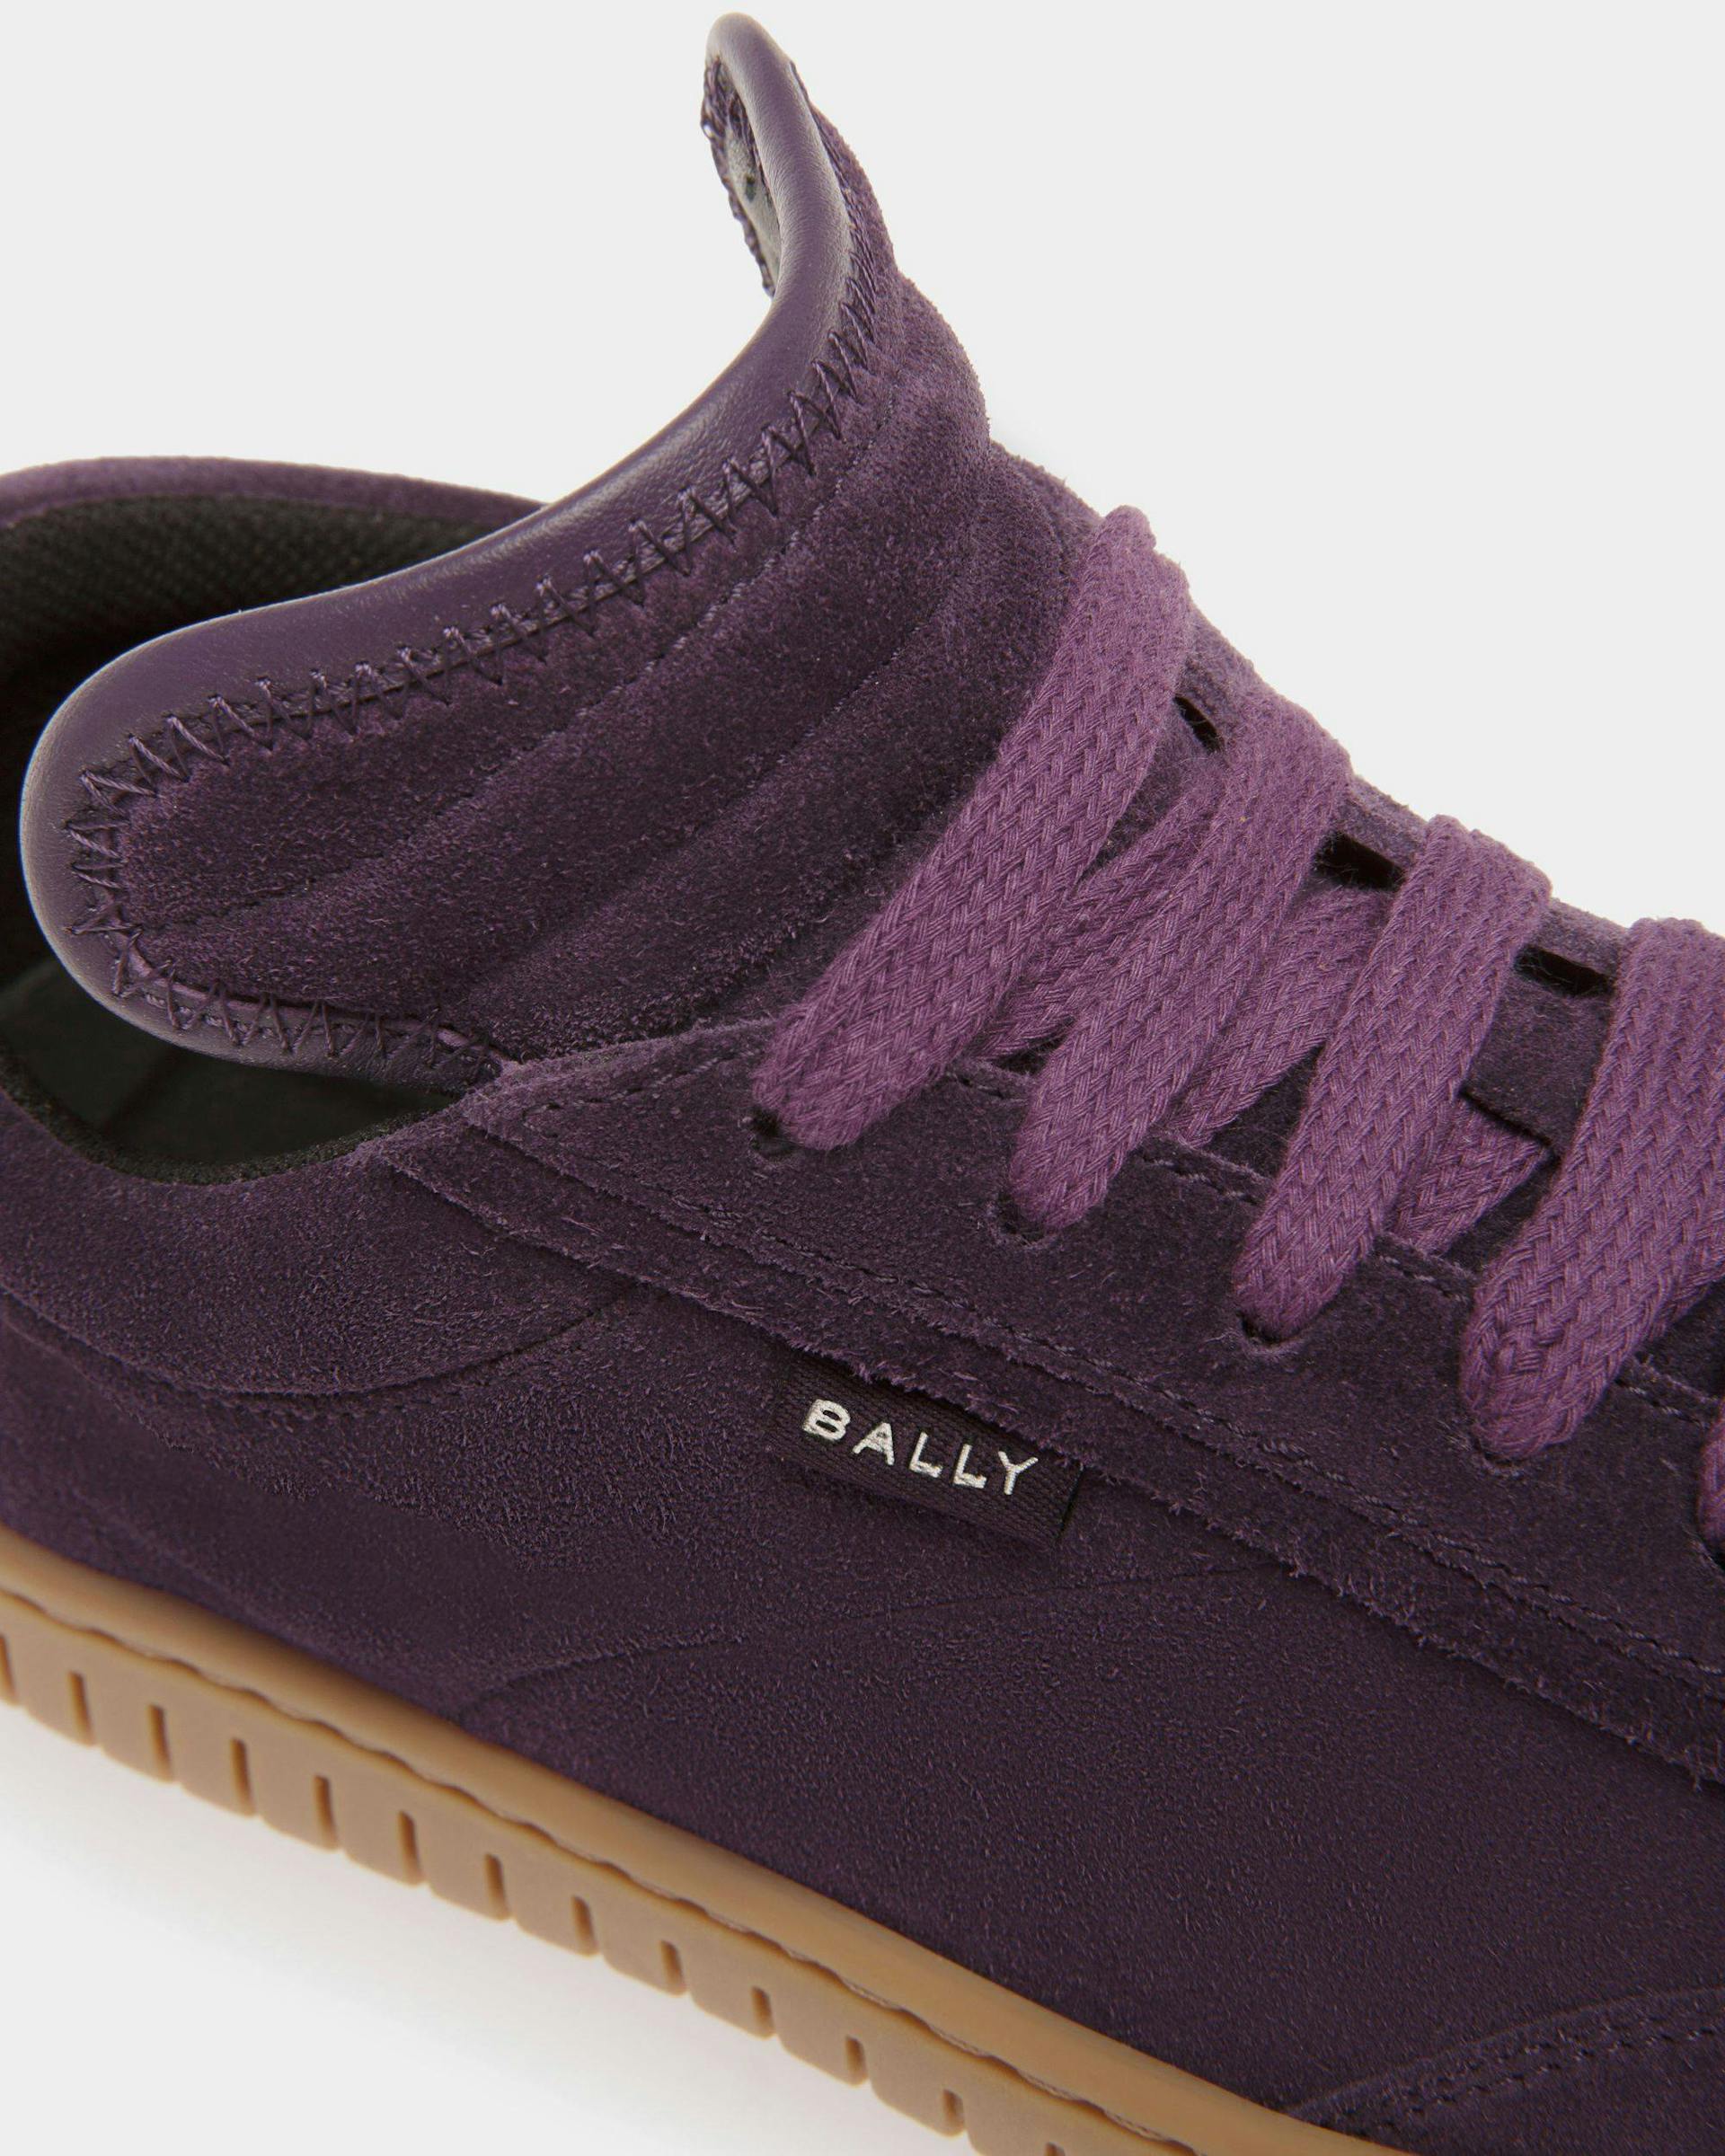 Player Sneakers In Orchid And Amber Leather - Women's - Bally - 05